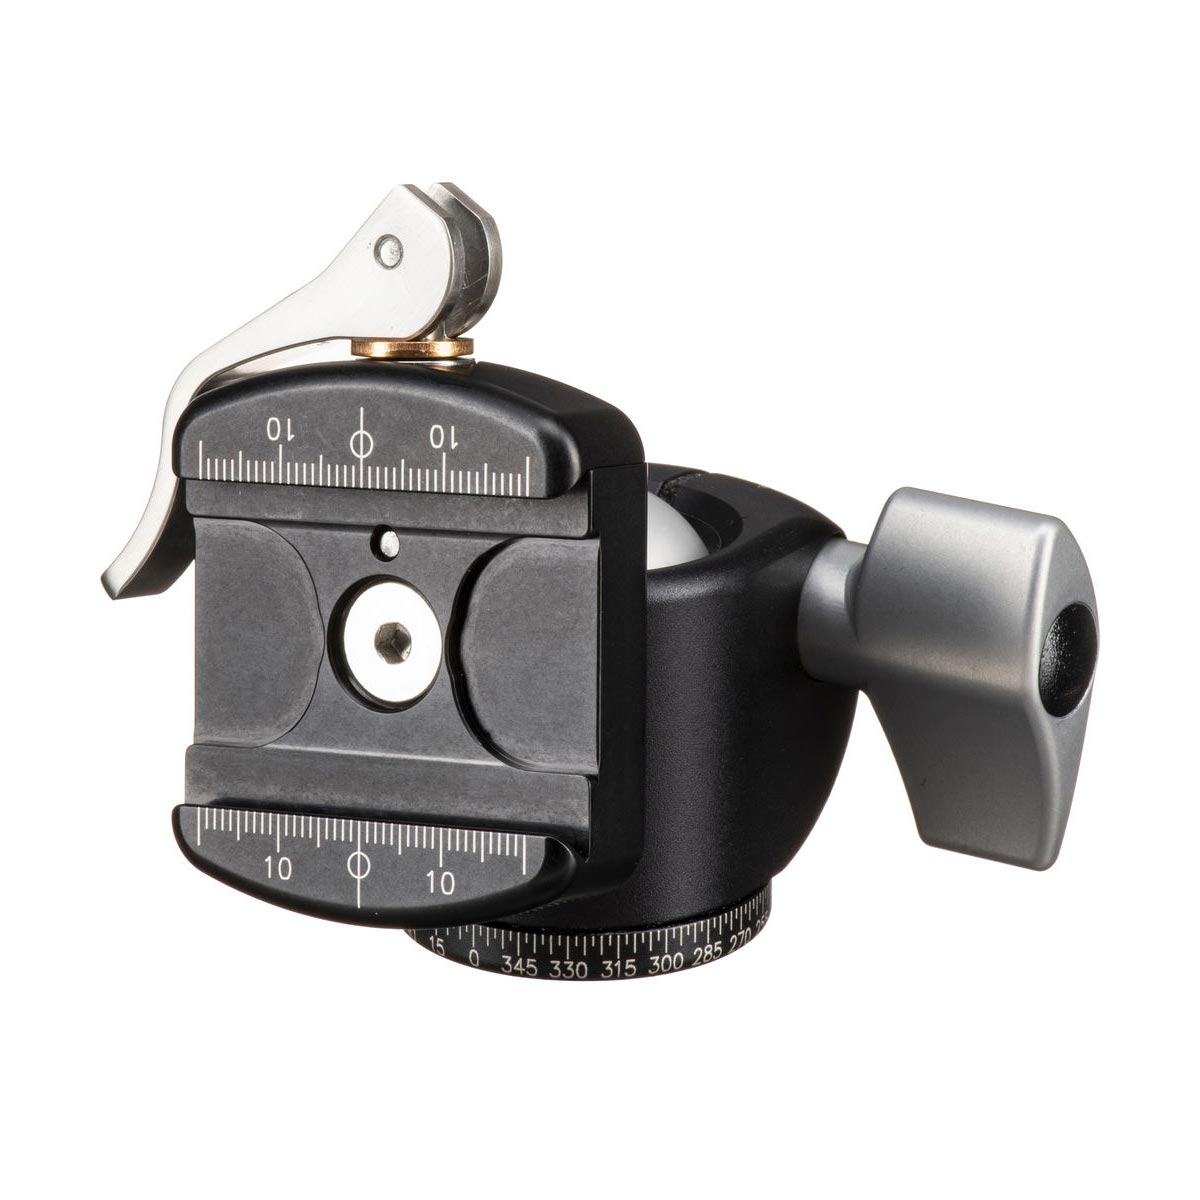 Really Right Stuff BH-30 Ballhead with Compact Lever Release Clamp